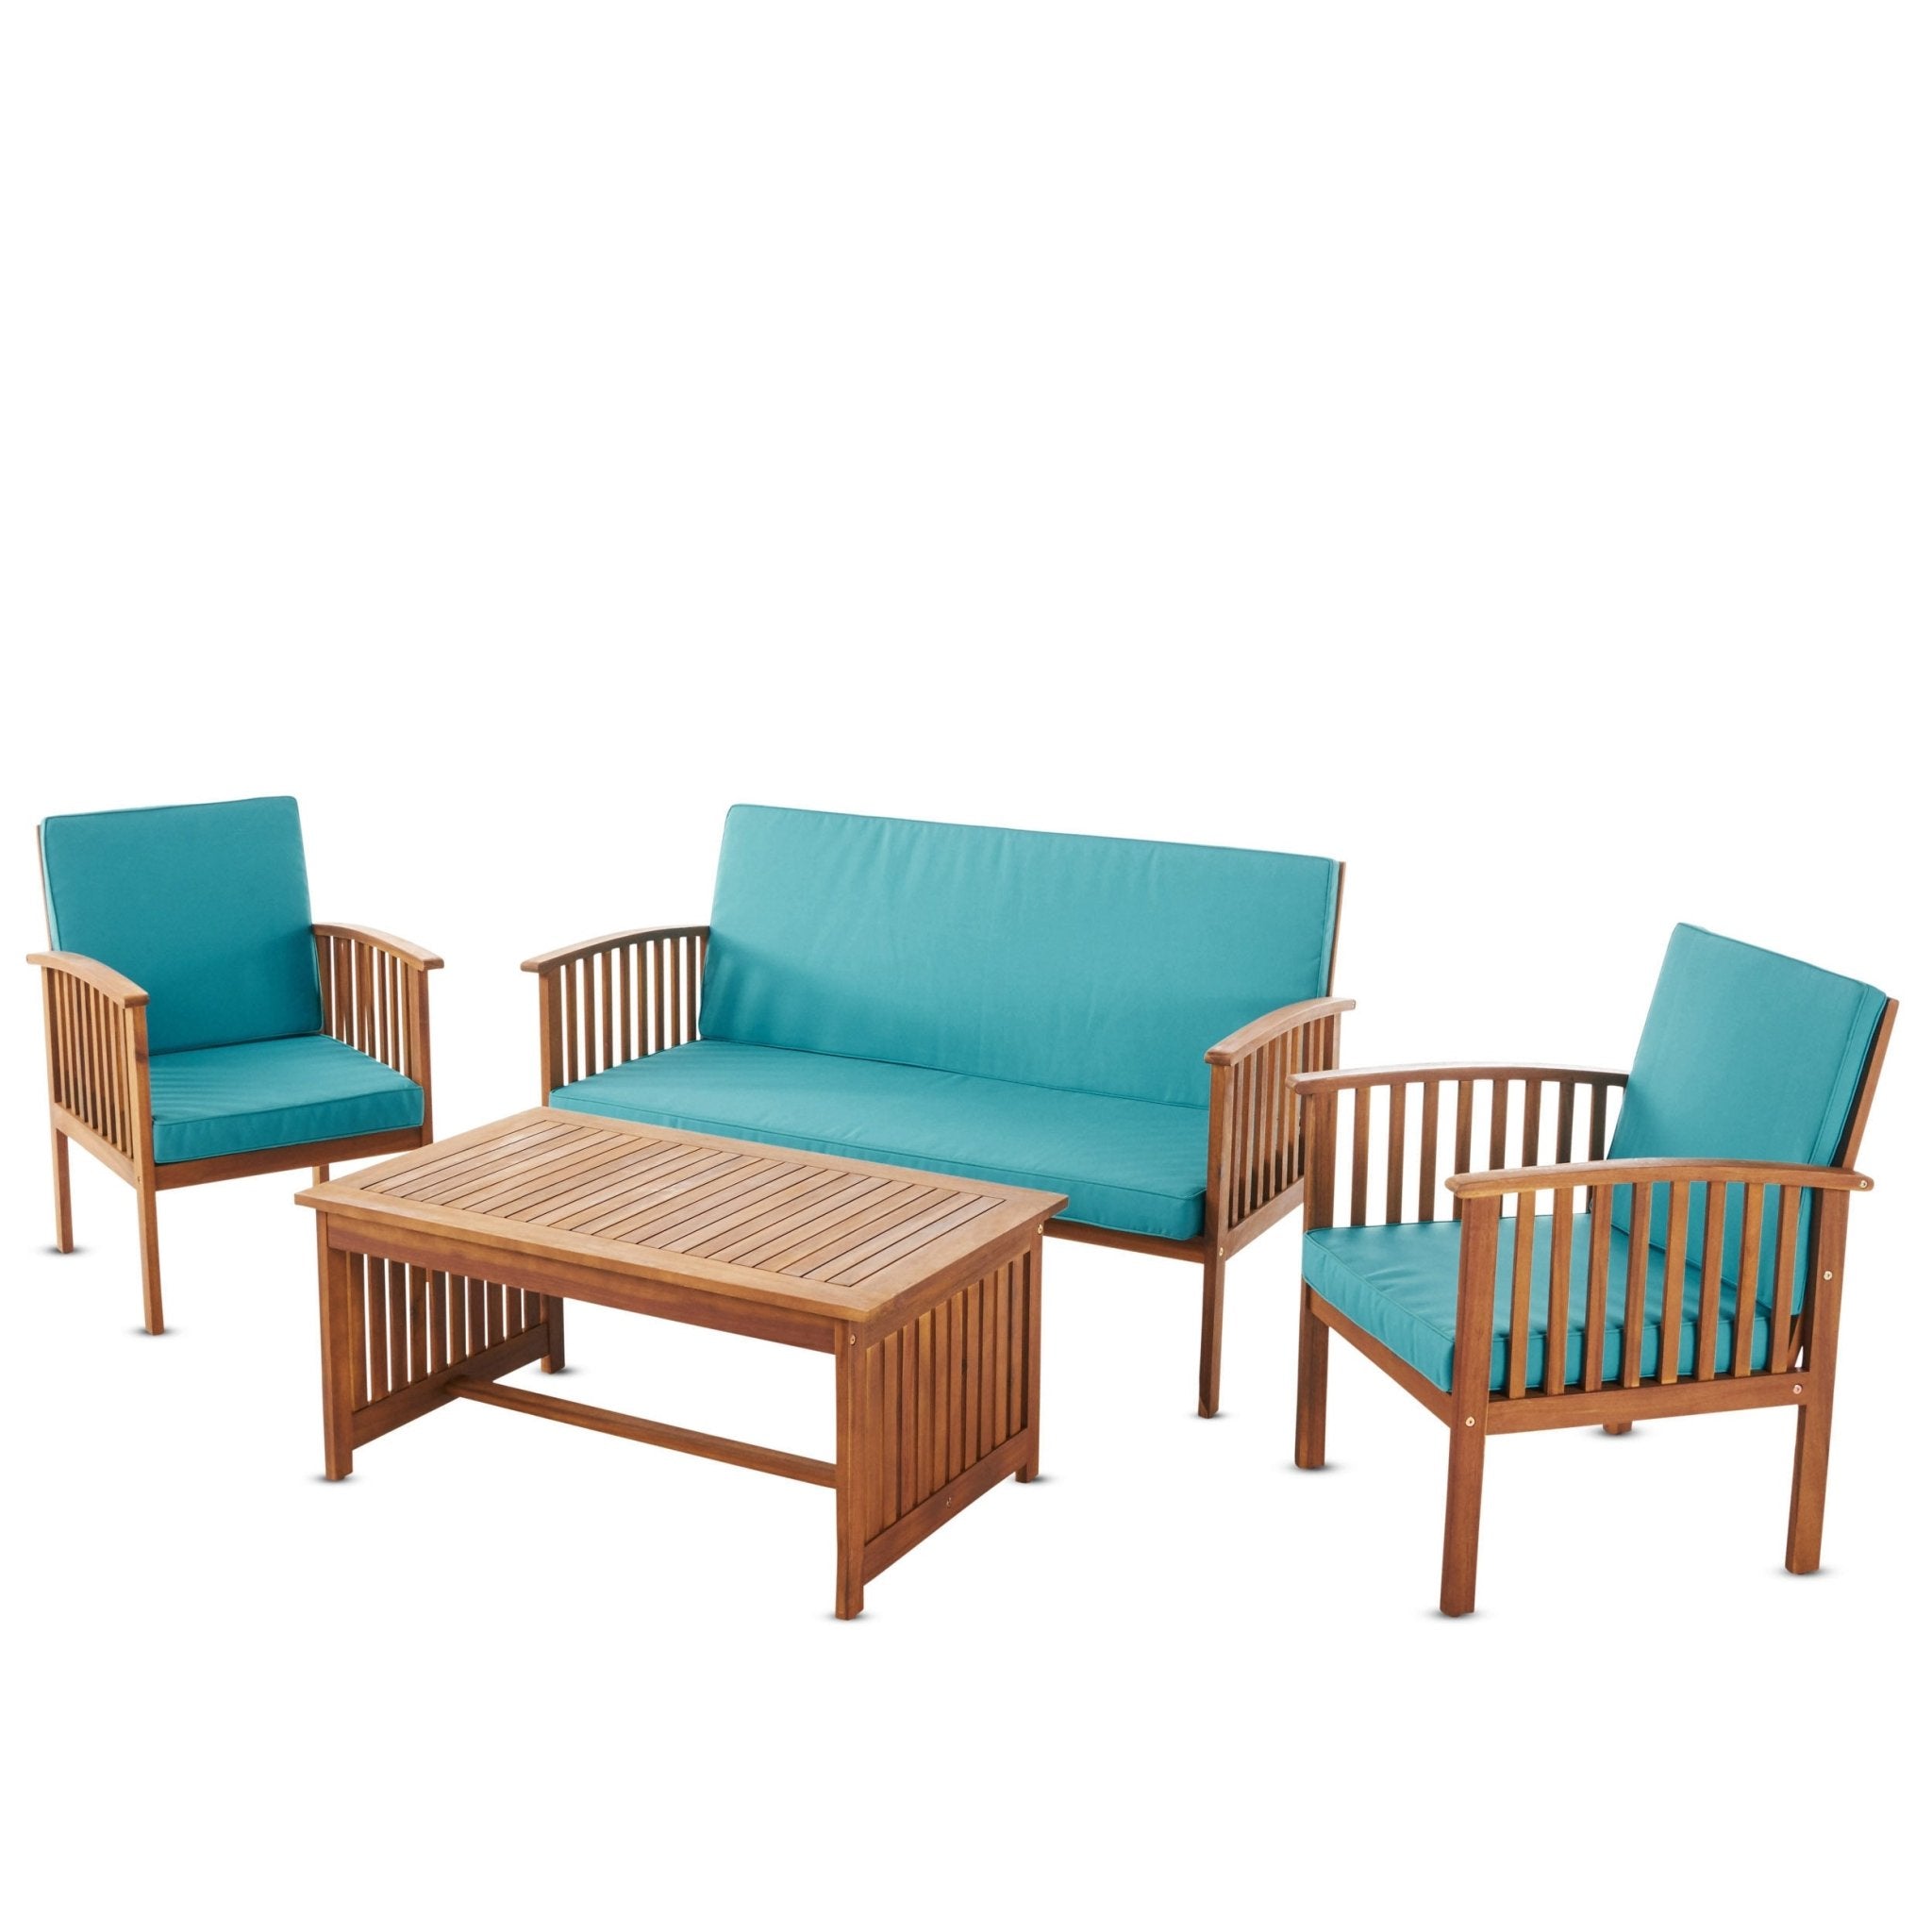 Prism 4-Piece Patio Sofa Set with Coffee Table, 2 Chairs and Loveseat, Teal